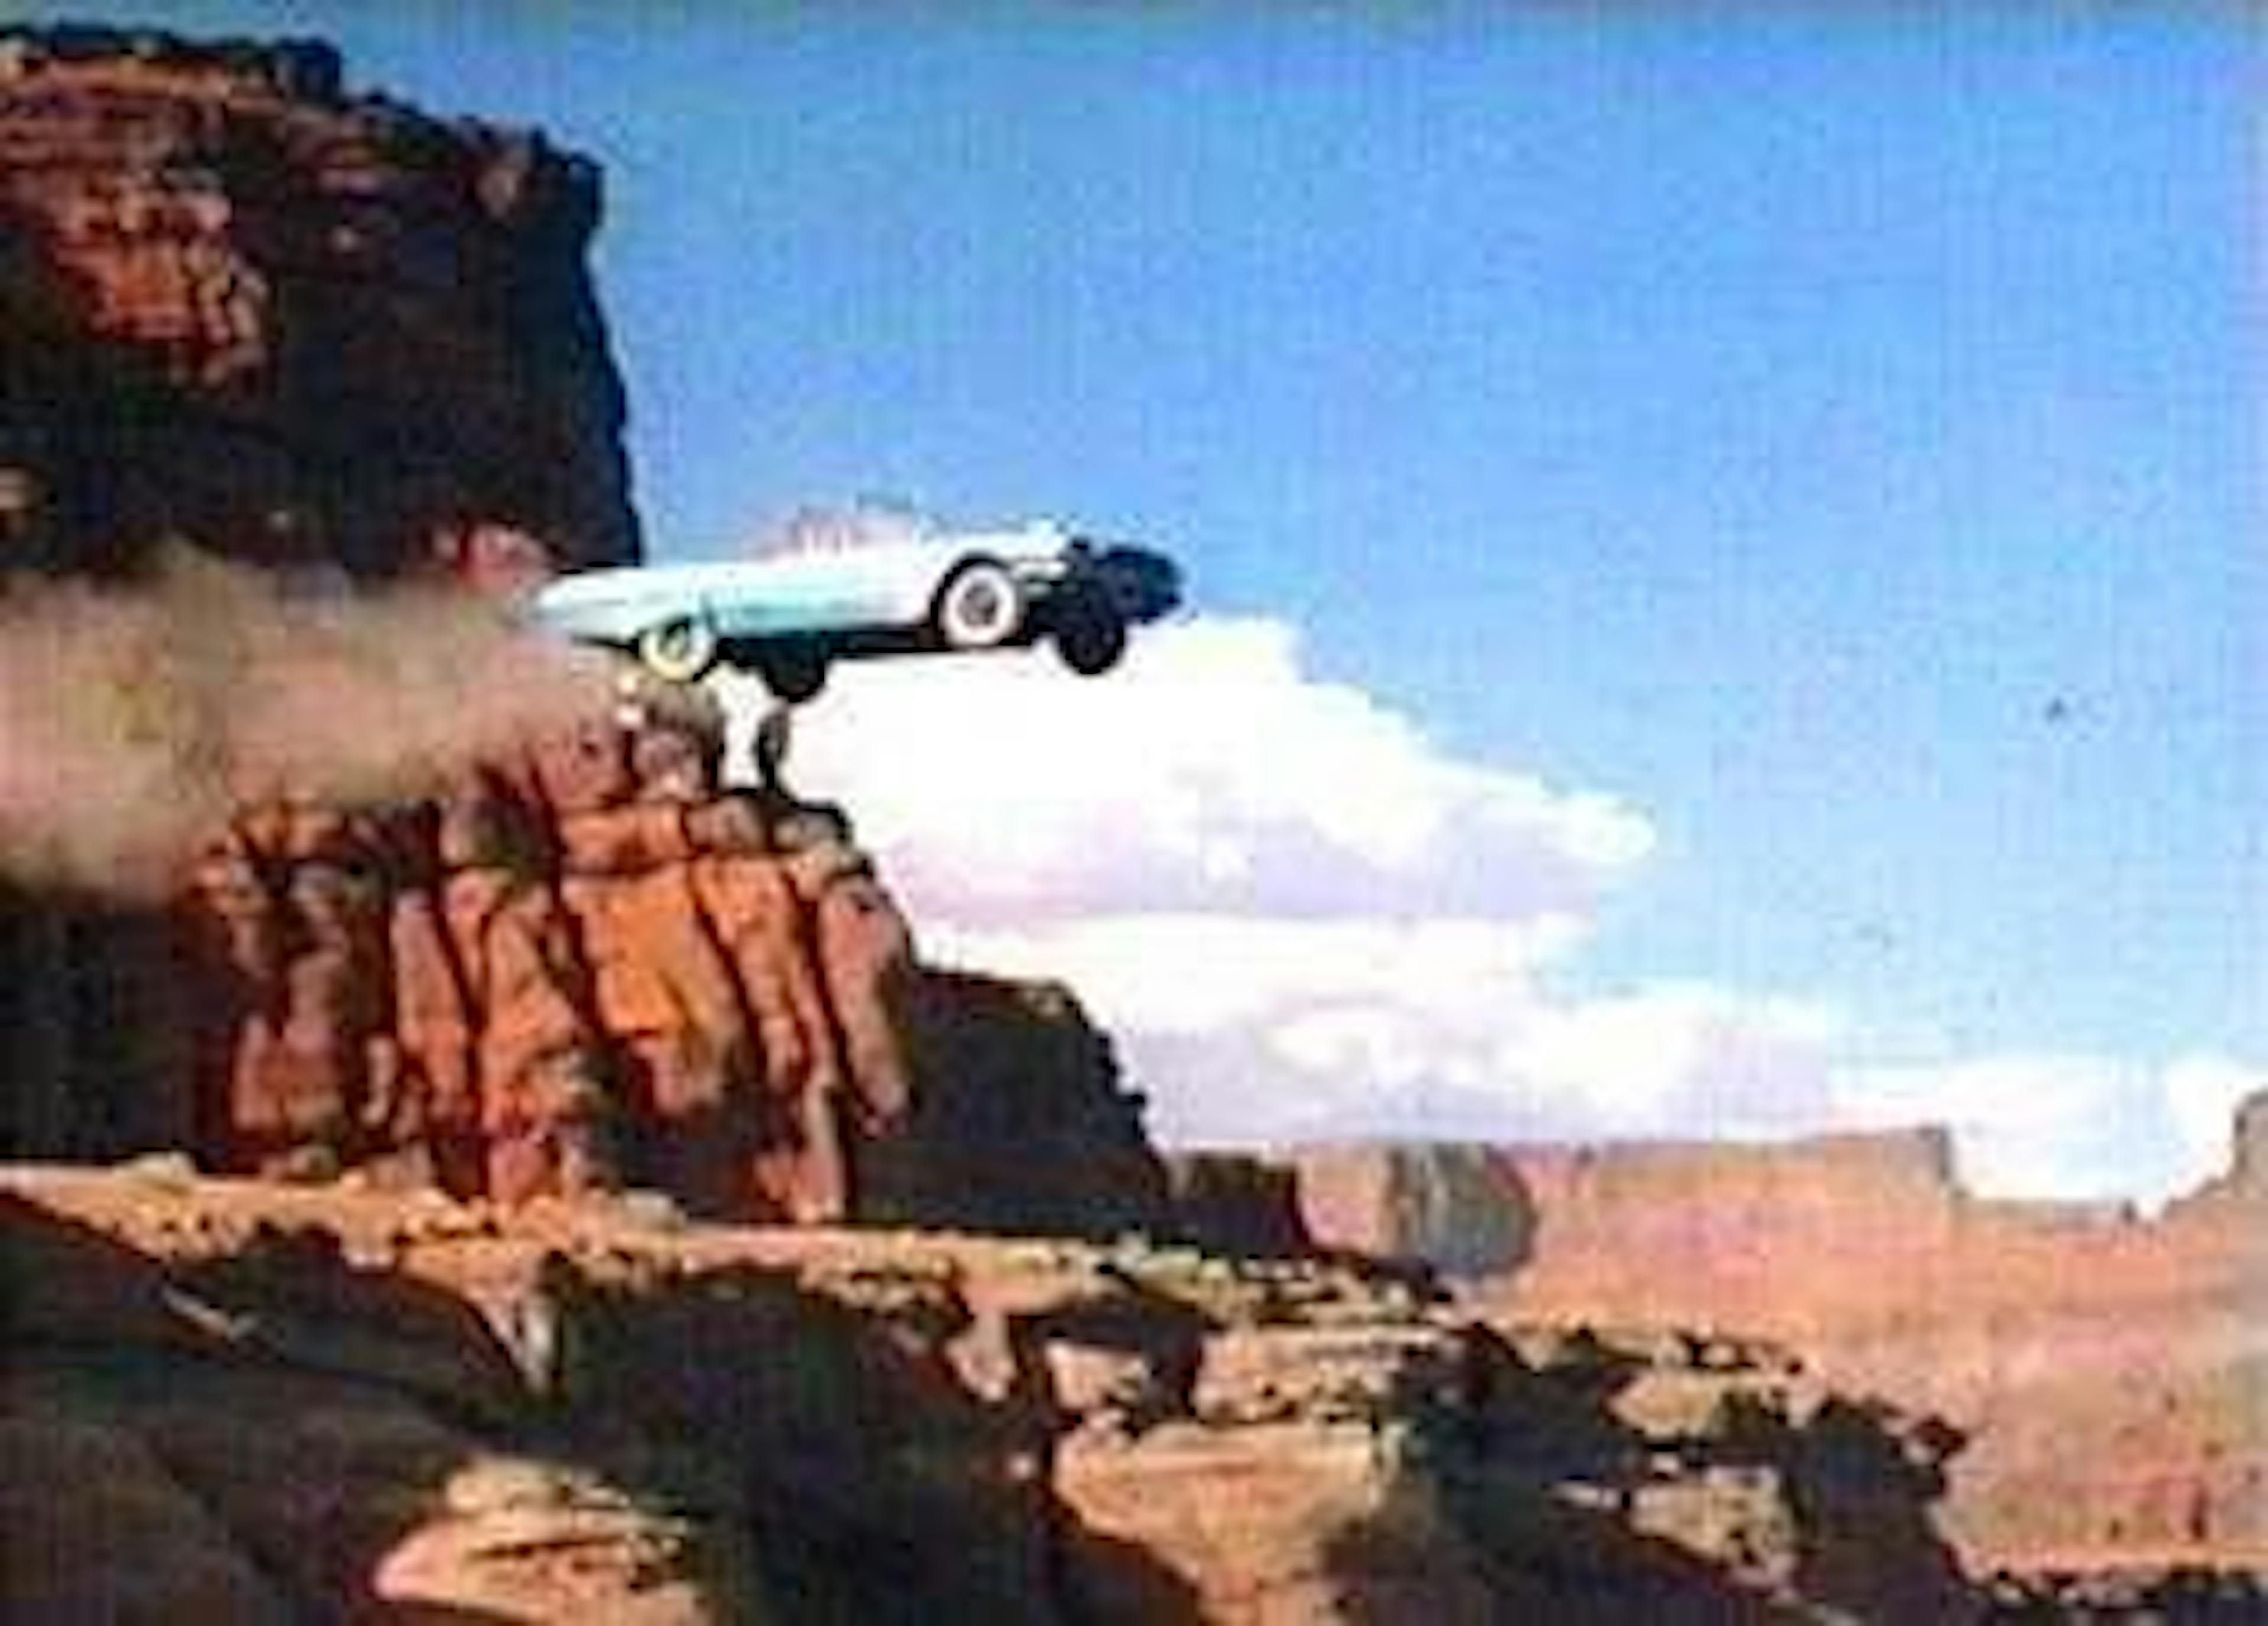 /bft-consensus-will-your-car-full-of-passengers-turn-right-left-or-fly-over-a-cliff feature image